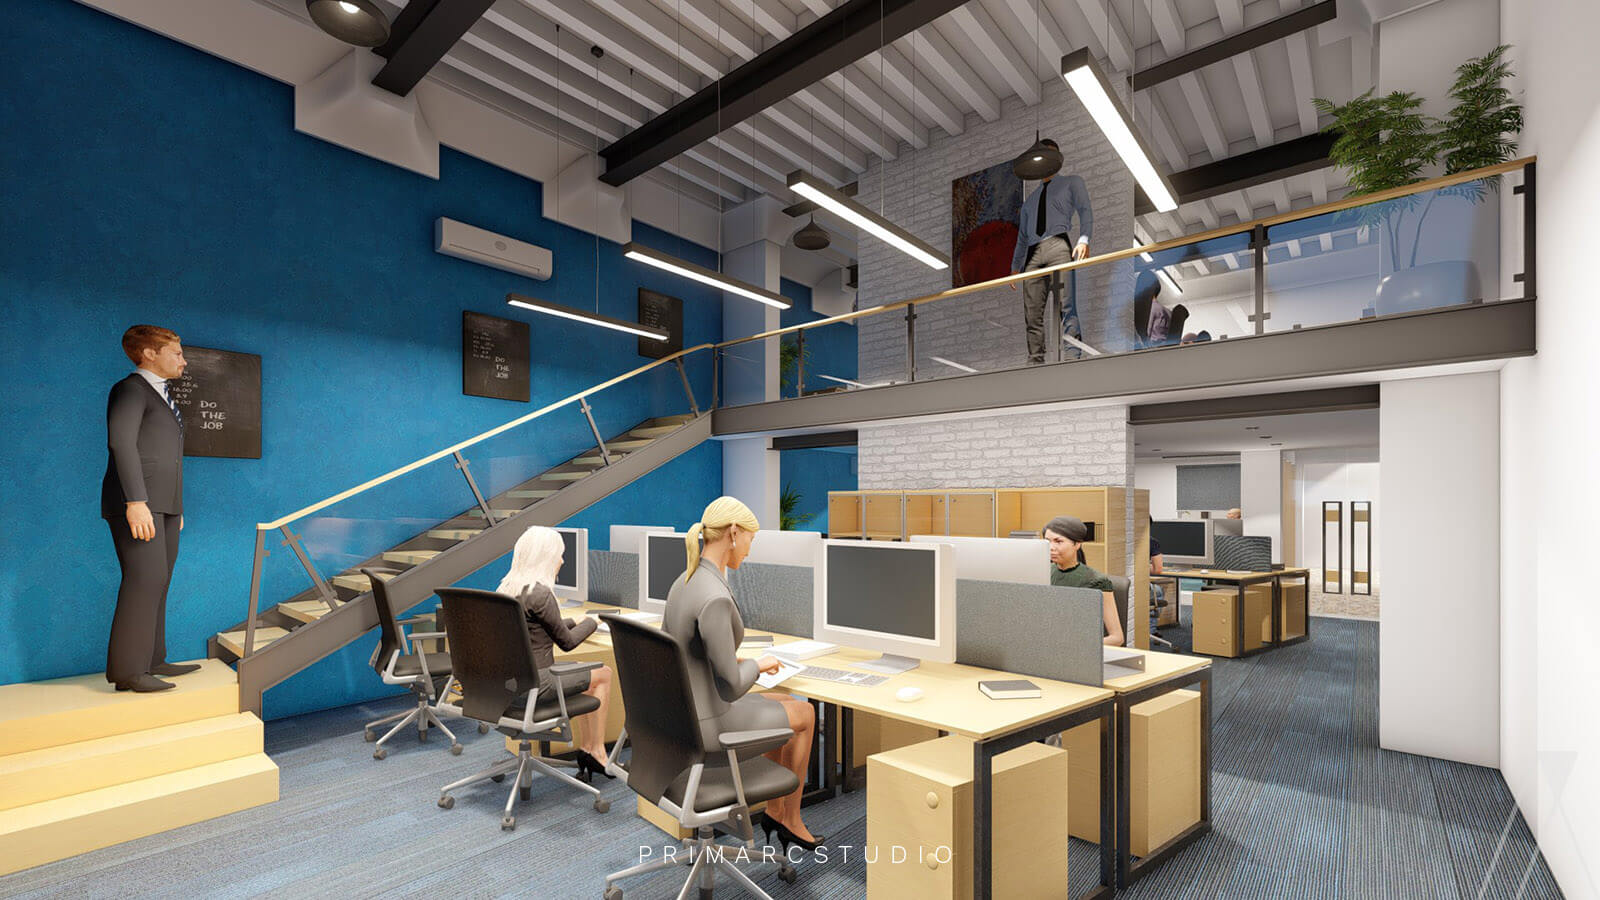 Office blue interior background with double storey provision for officer workers